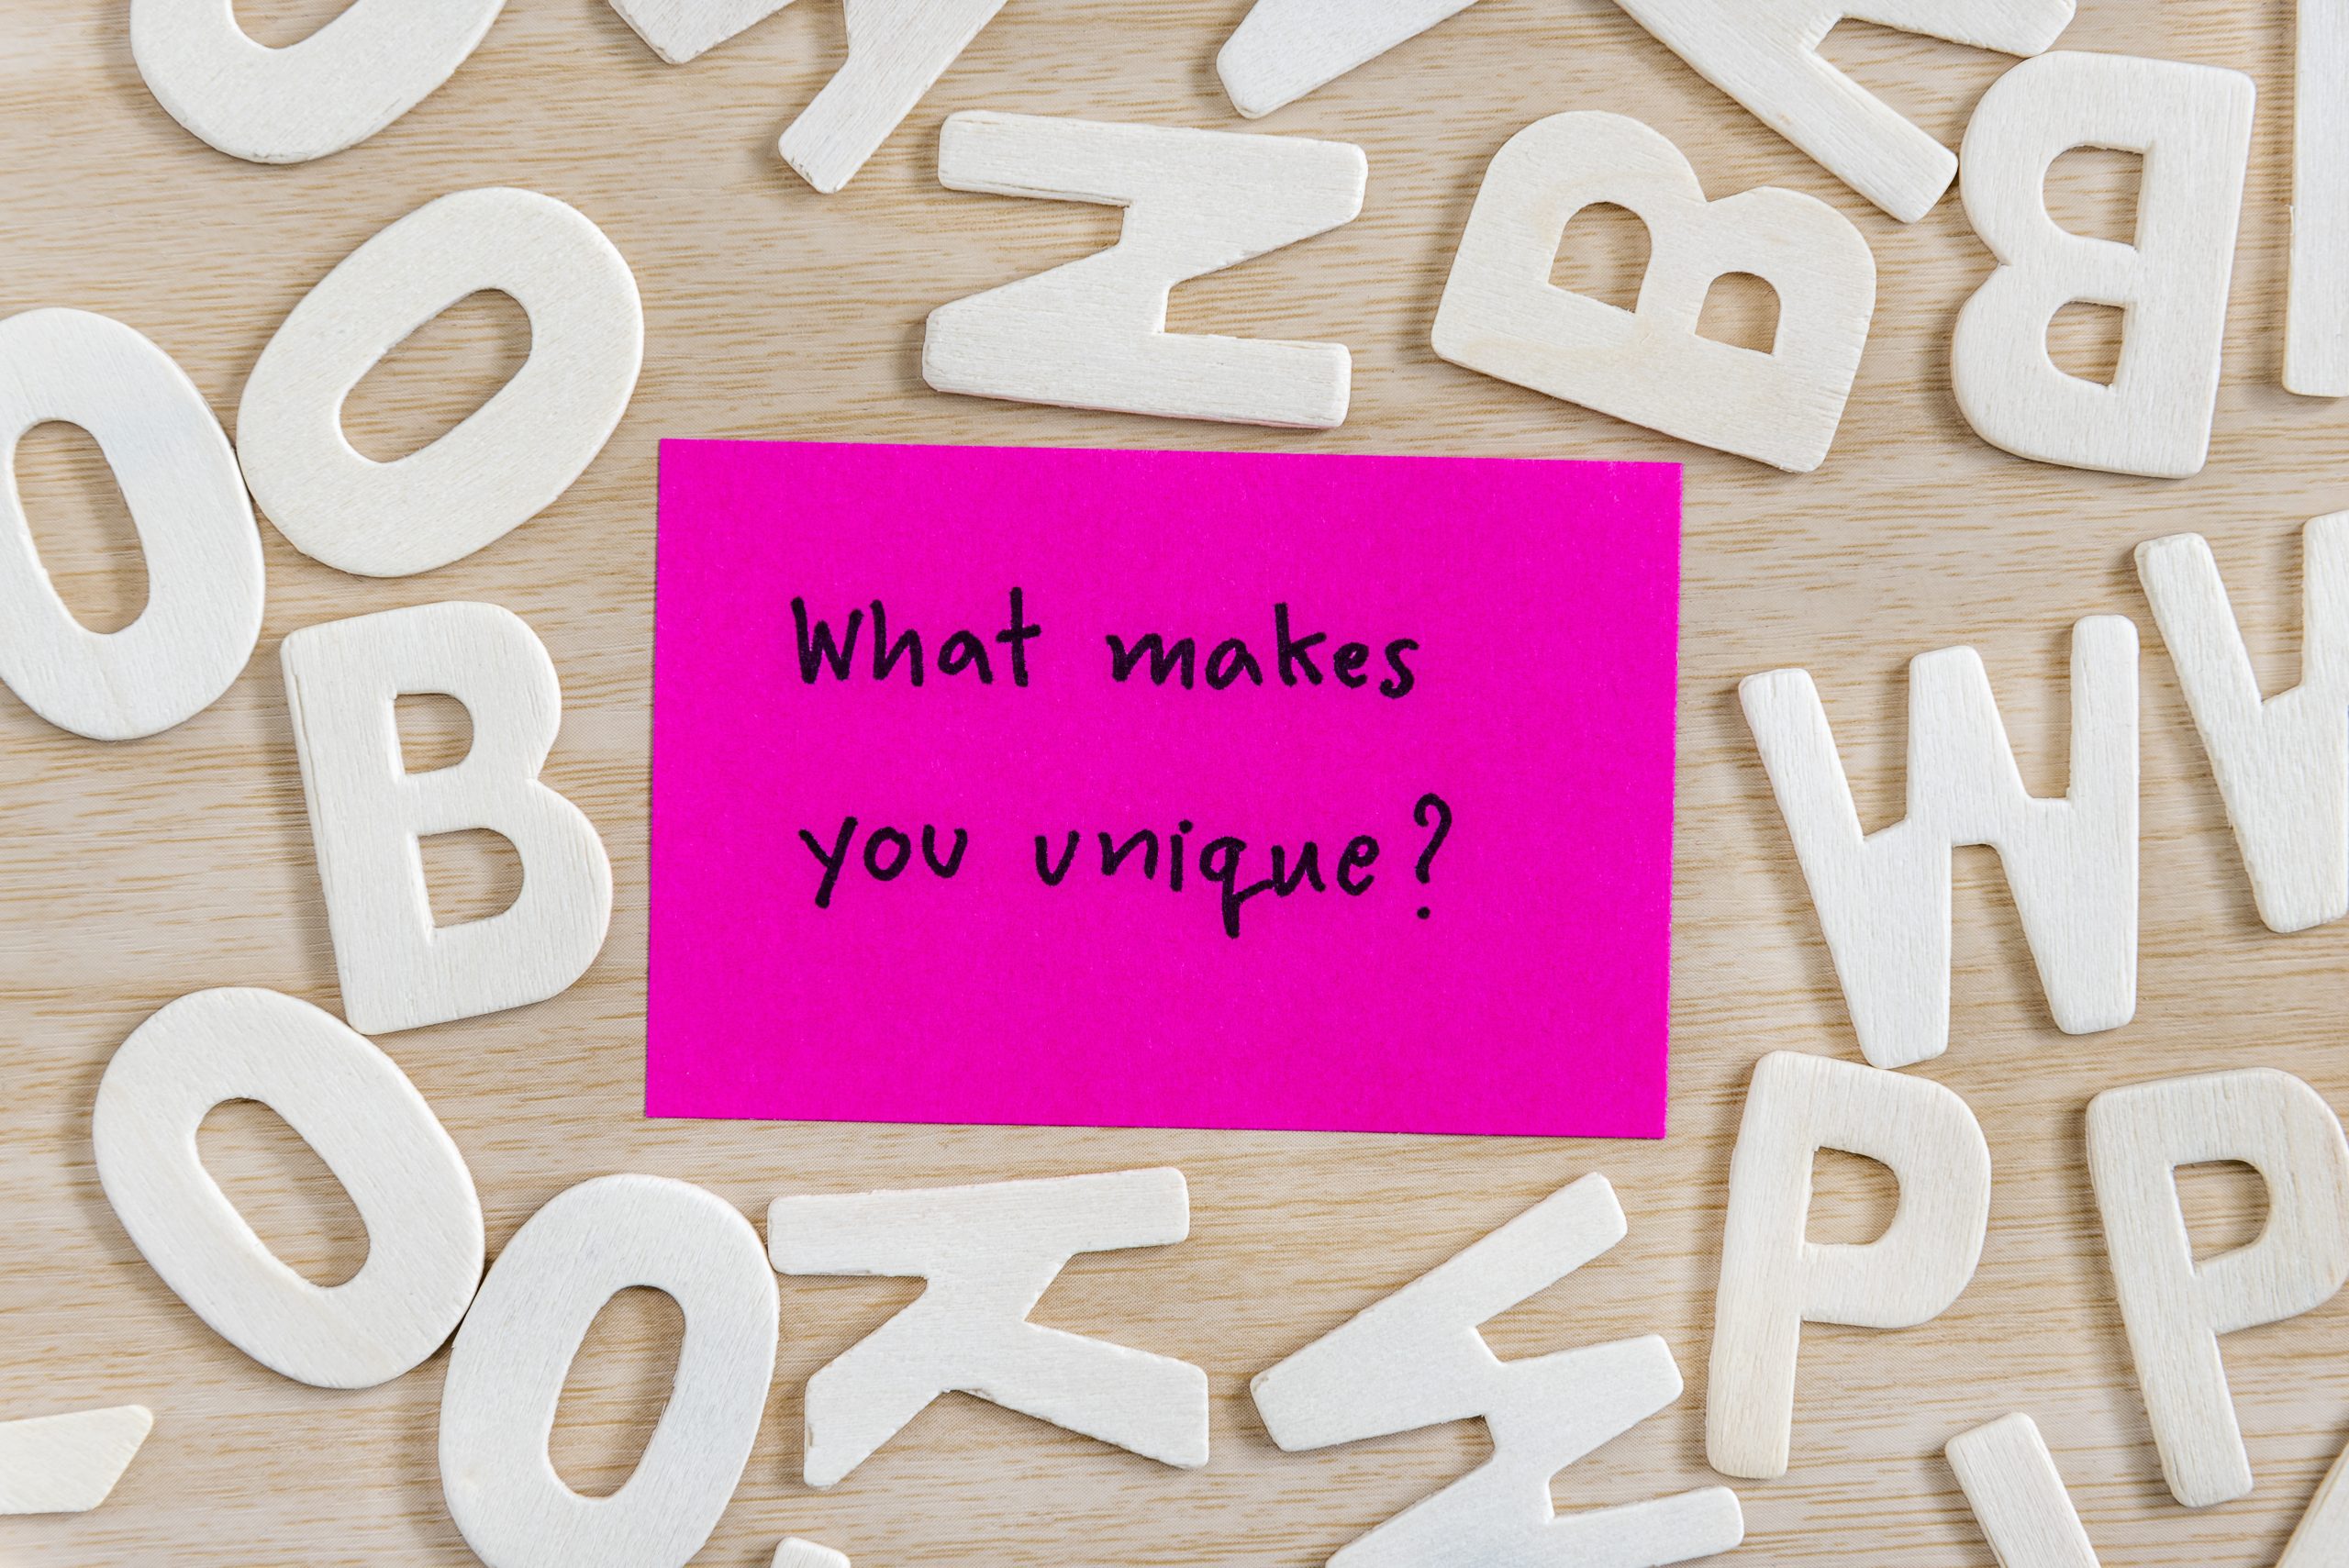 'What makes you unique?' on a pink sticky note surrounded by letters on a wooden desk